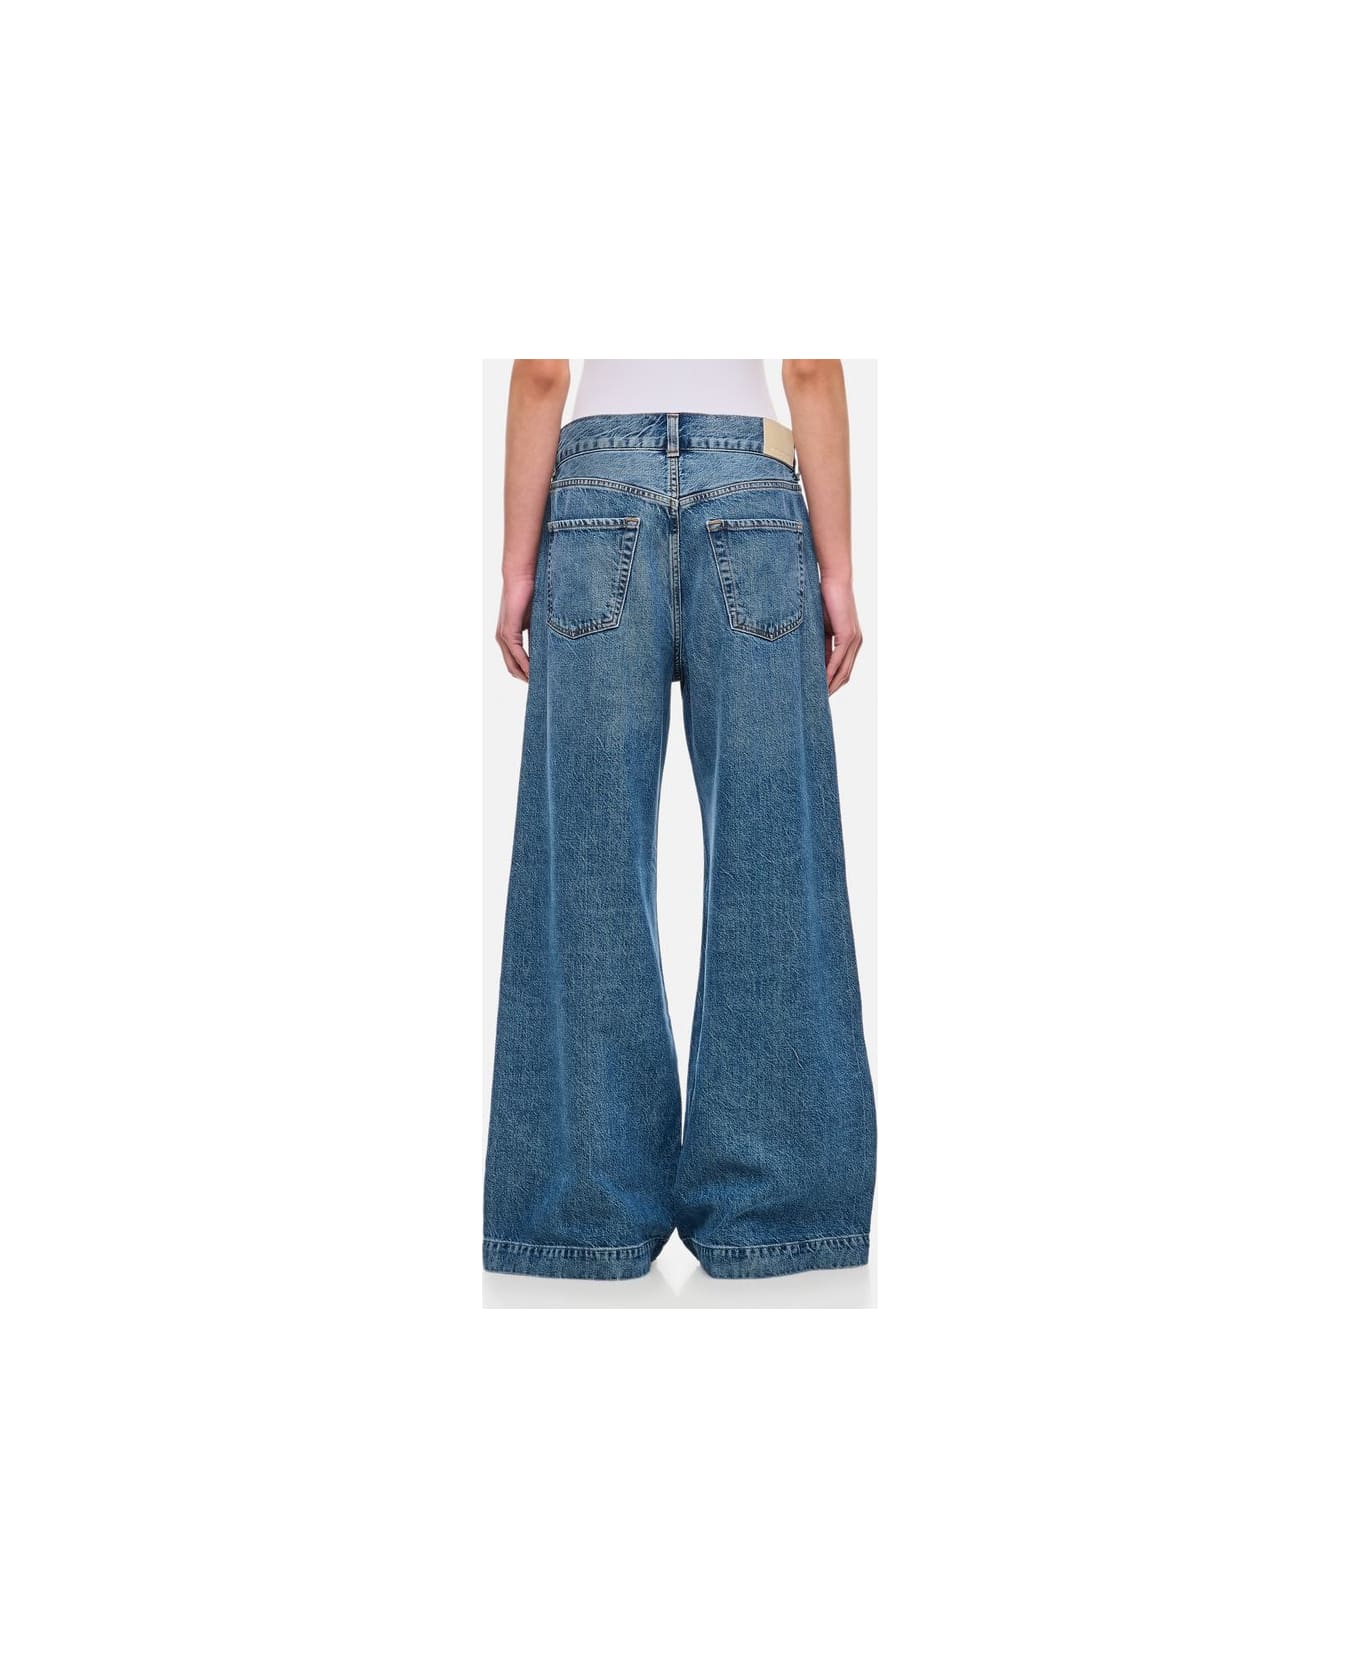 Citizens of Humanity Beverly Denim Pants - Blue